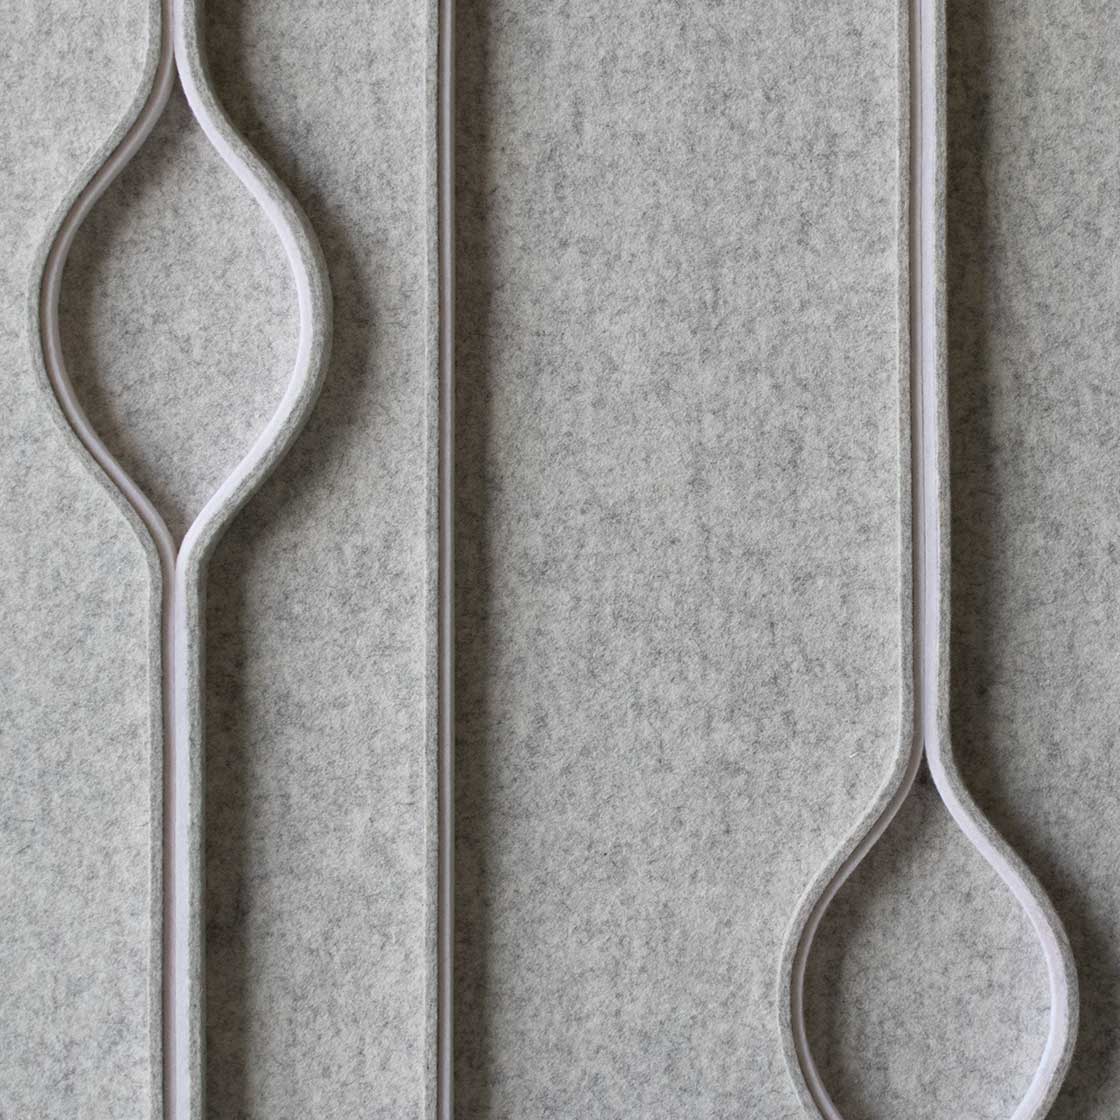 Close up of light gray wall covering with vertical lines and occasional raindrop shapes